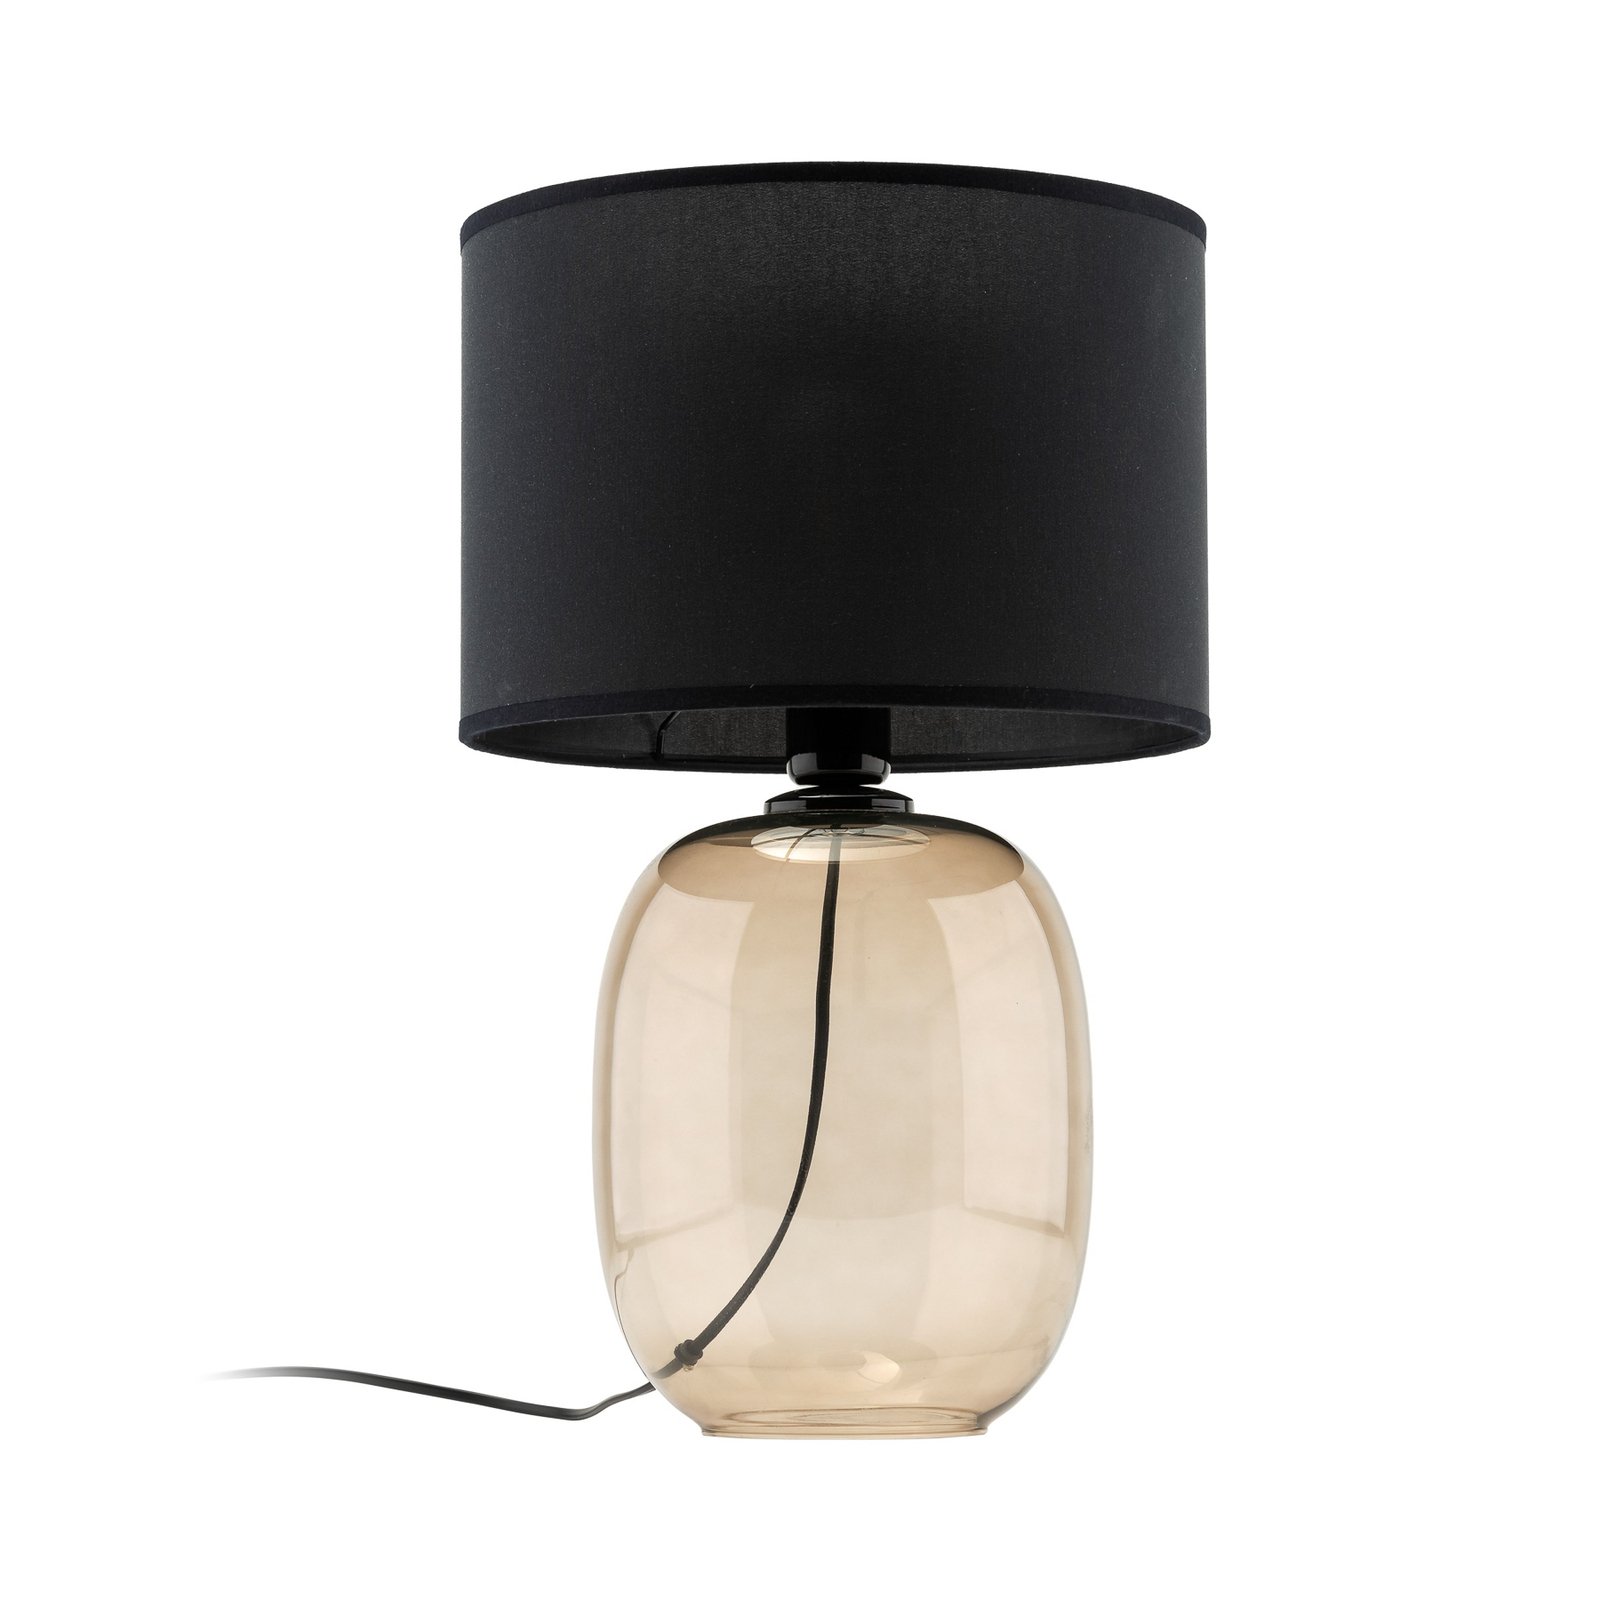 Melody table lamp, height 48 cm, brown glass, black textile